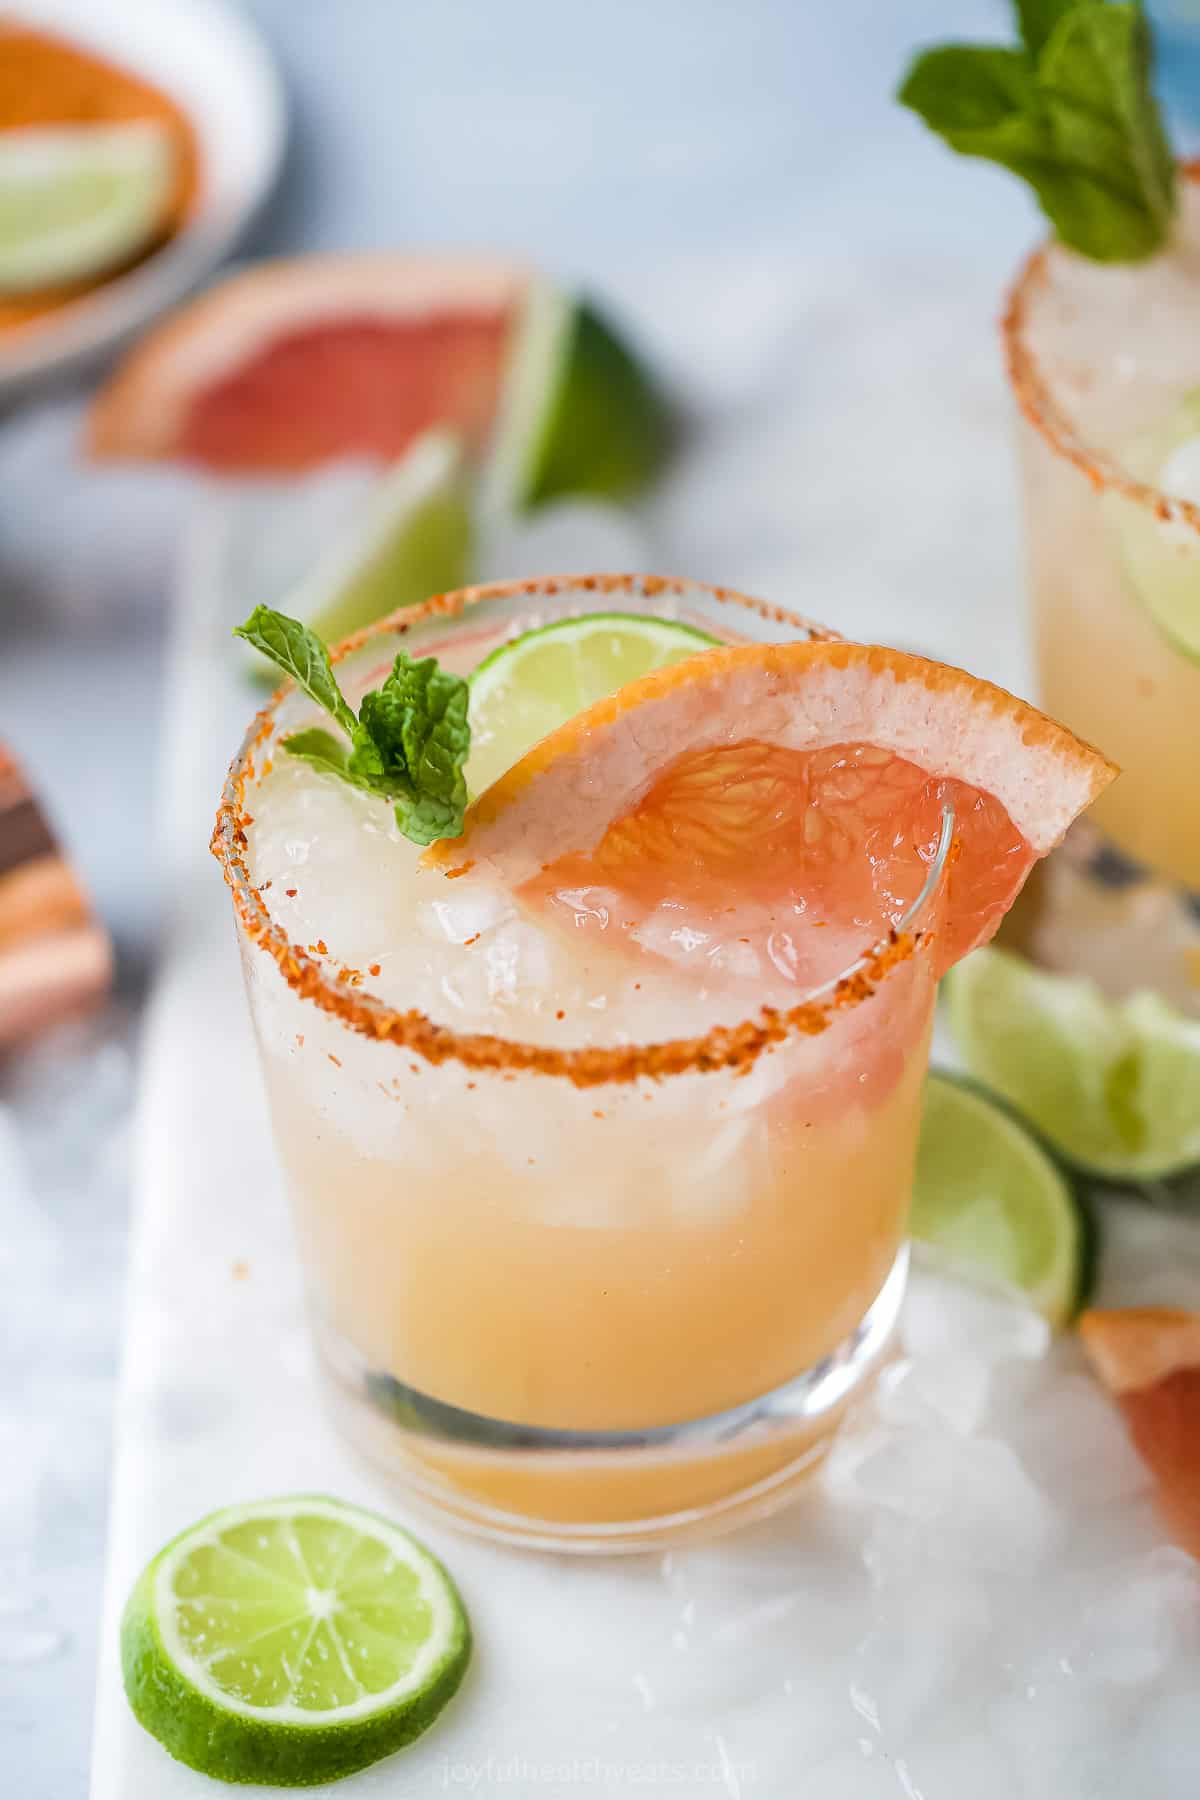 A grapefruit tequila mixed drink in a glass with ice and a tajín-coated rim